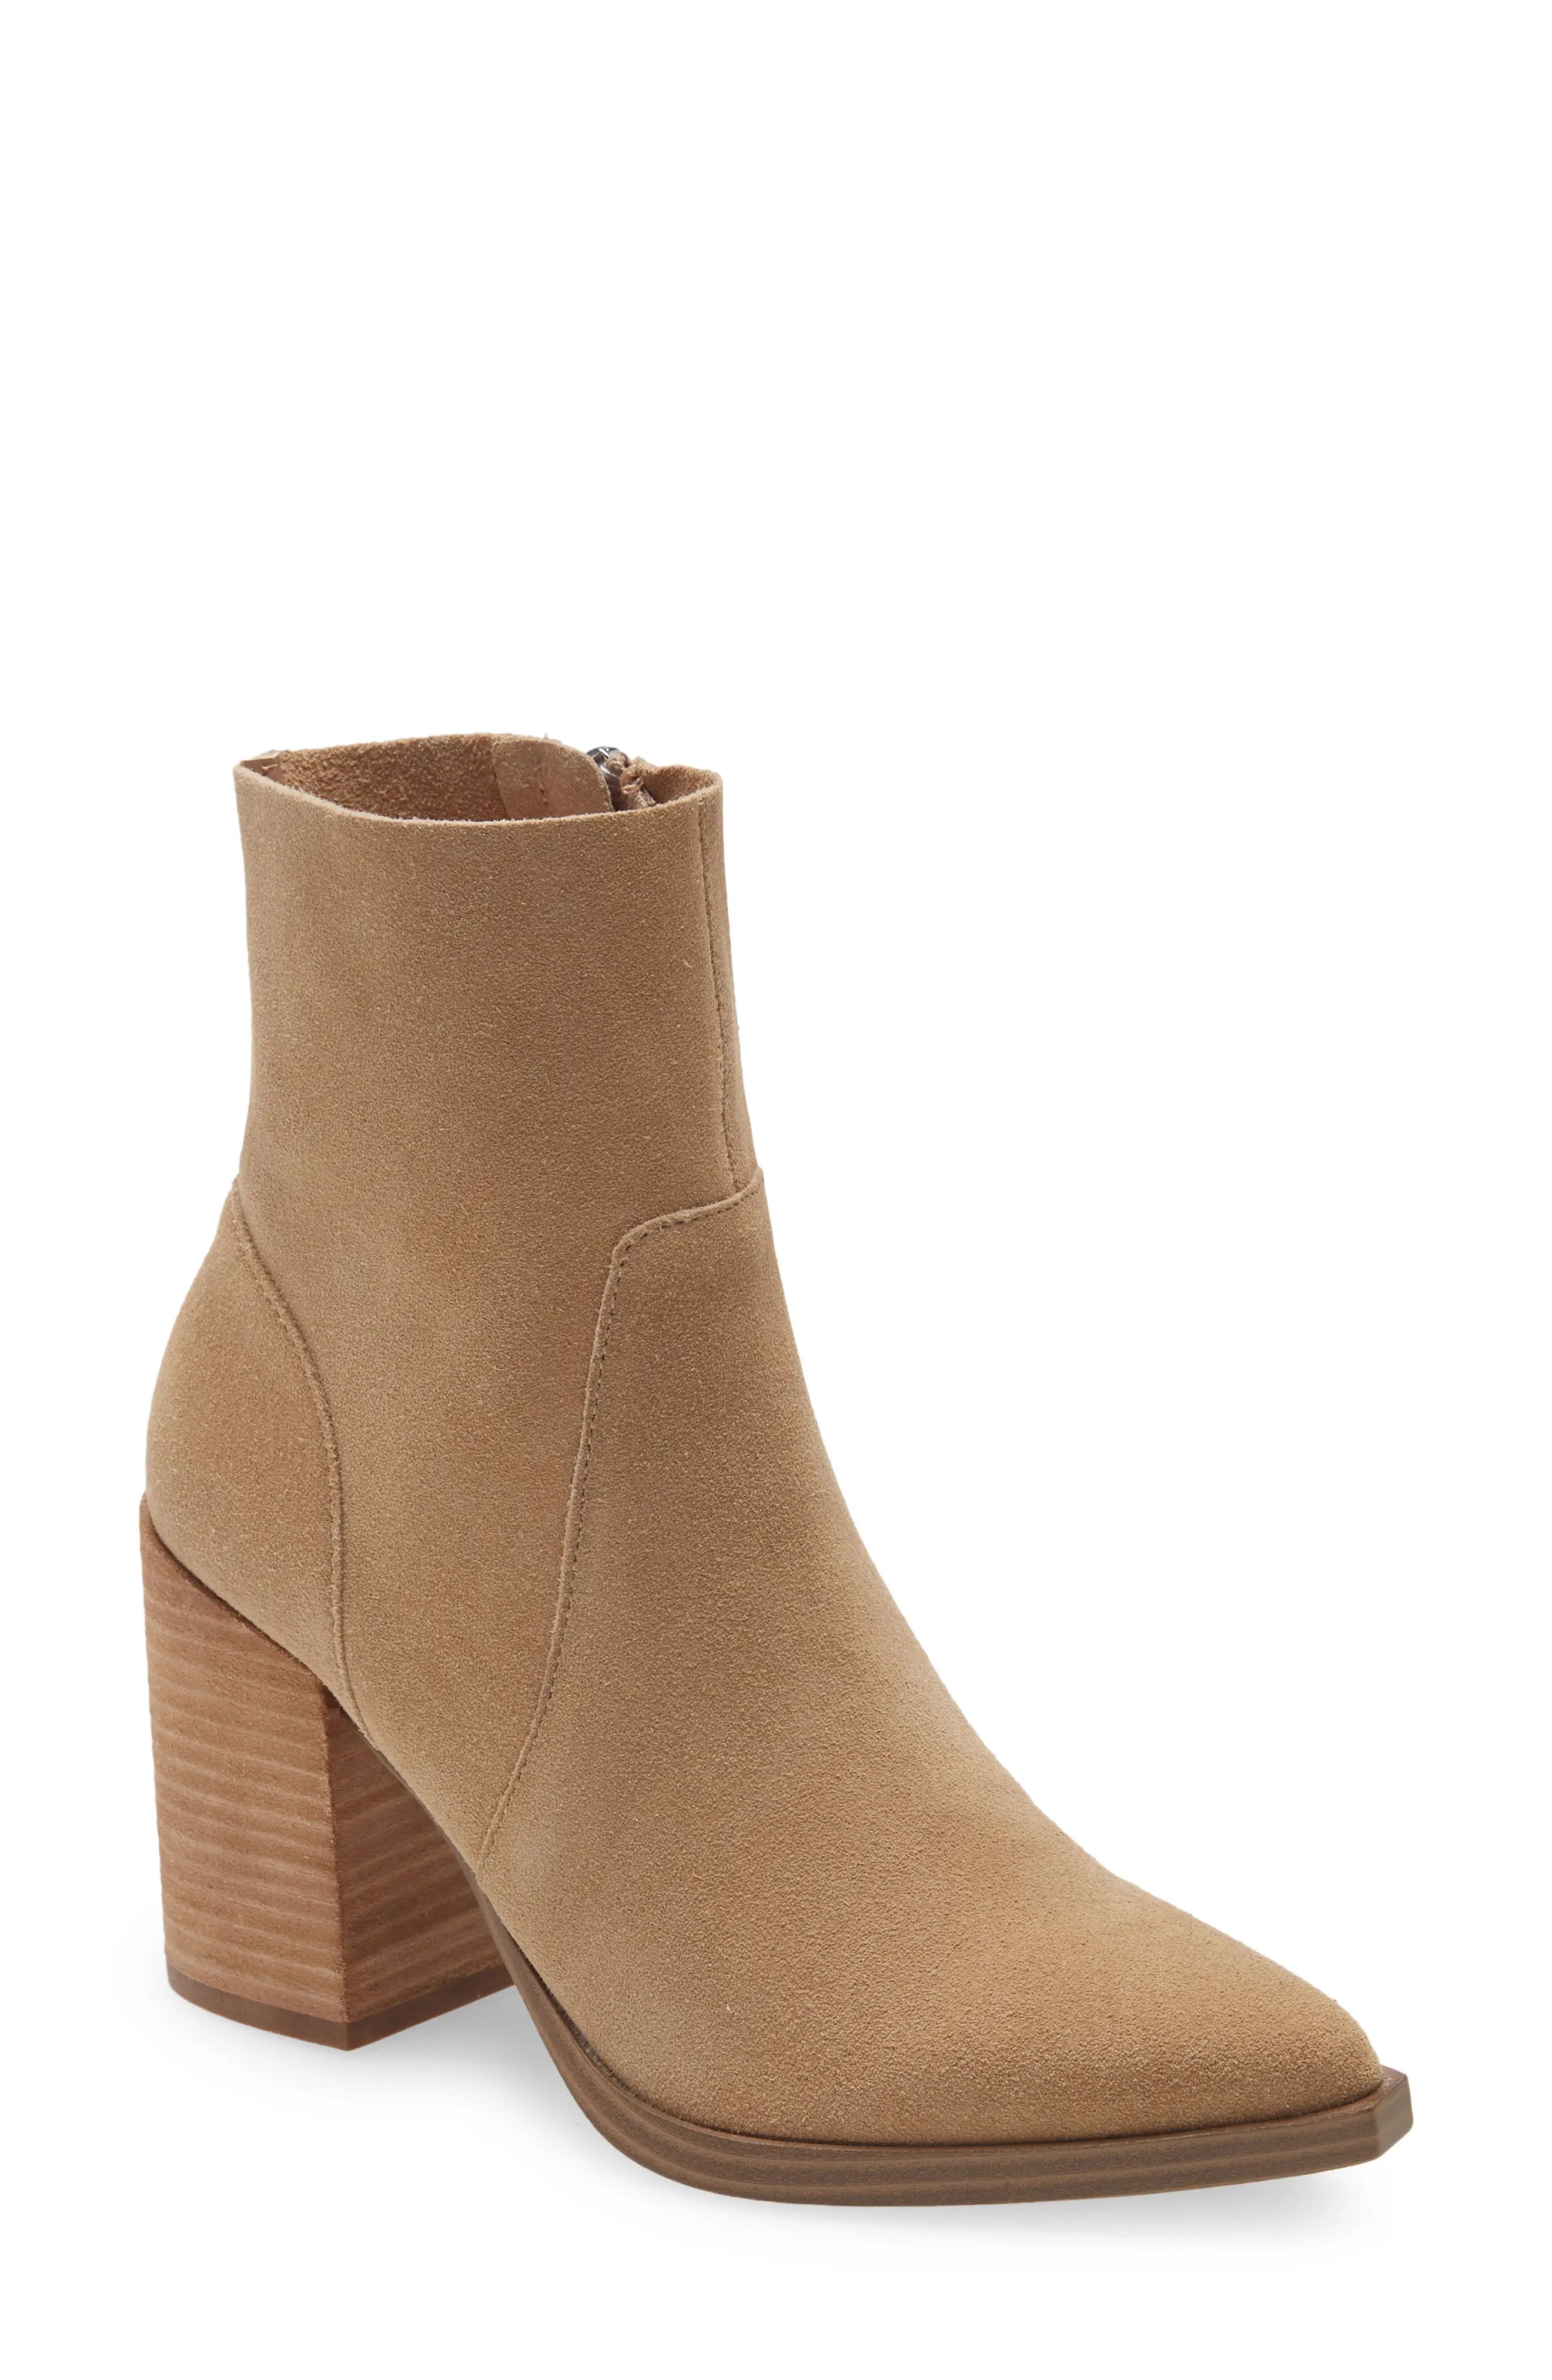 Steve Madden Calabria Pointed Toe Bootie, Size 7 in Sand Suede at Nordstrom | Nordstrom